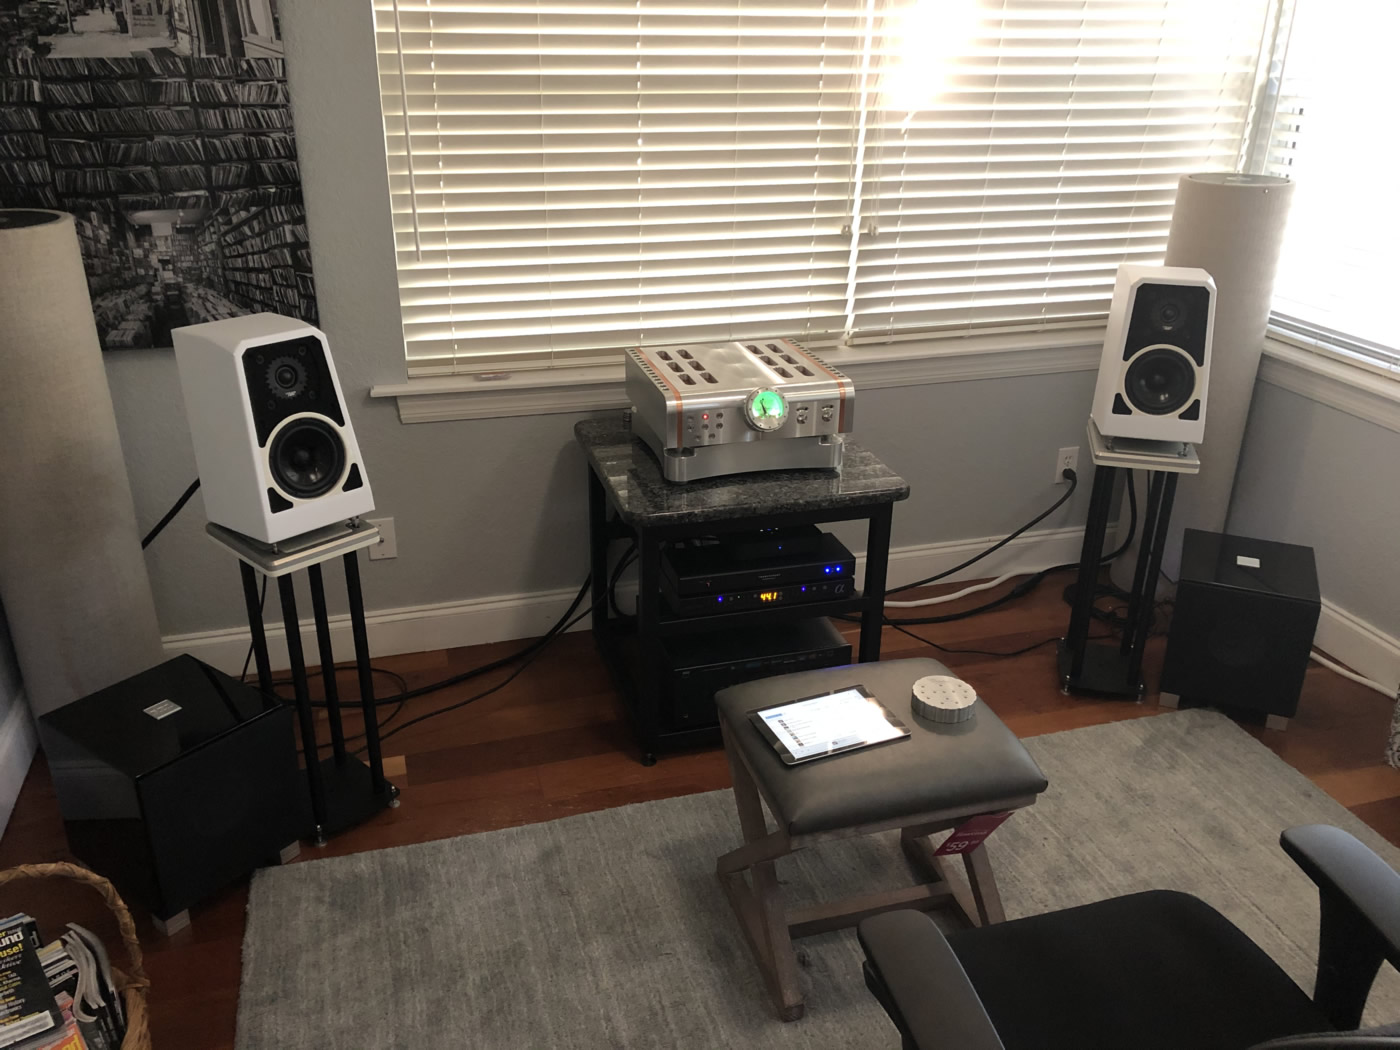 D'Agostino Momentum Int Amp w Wilson Tune Tots n dCS Rossini and REL T7i Subwoofers